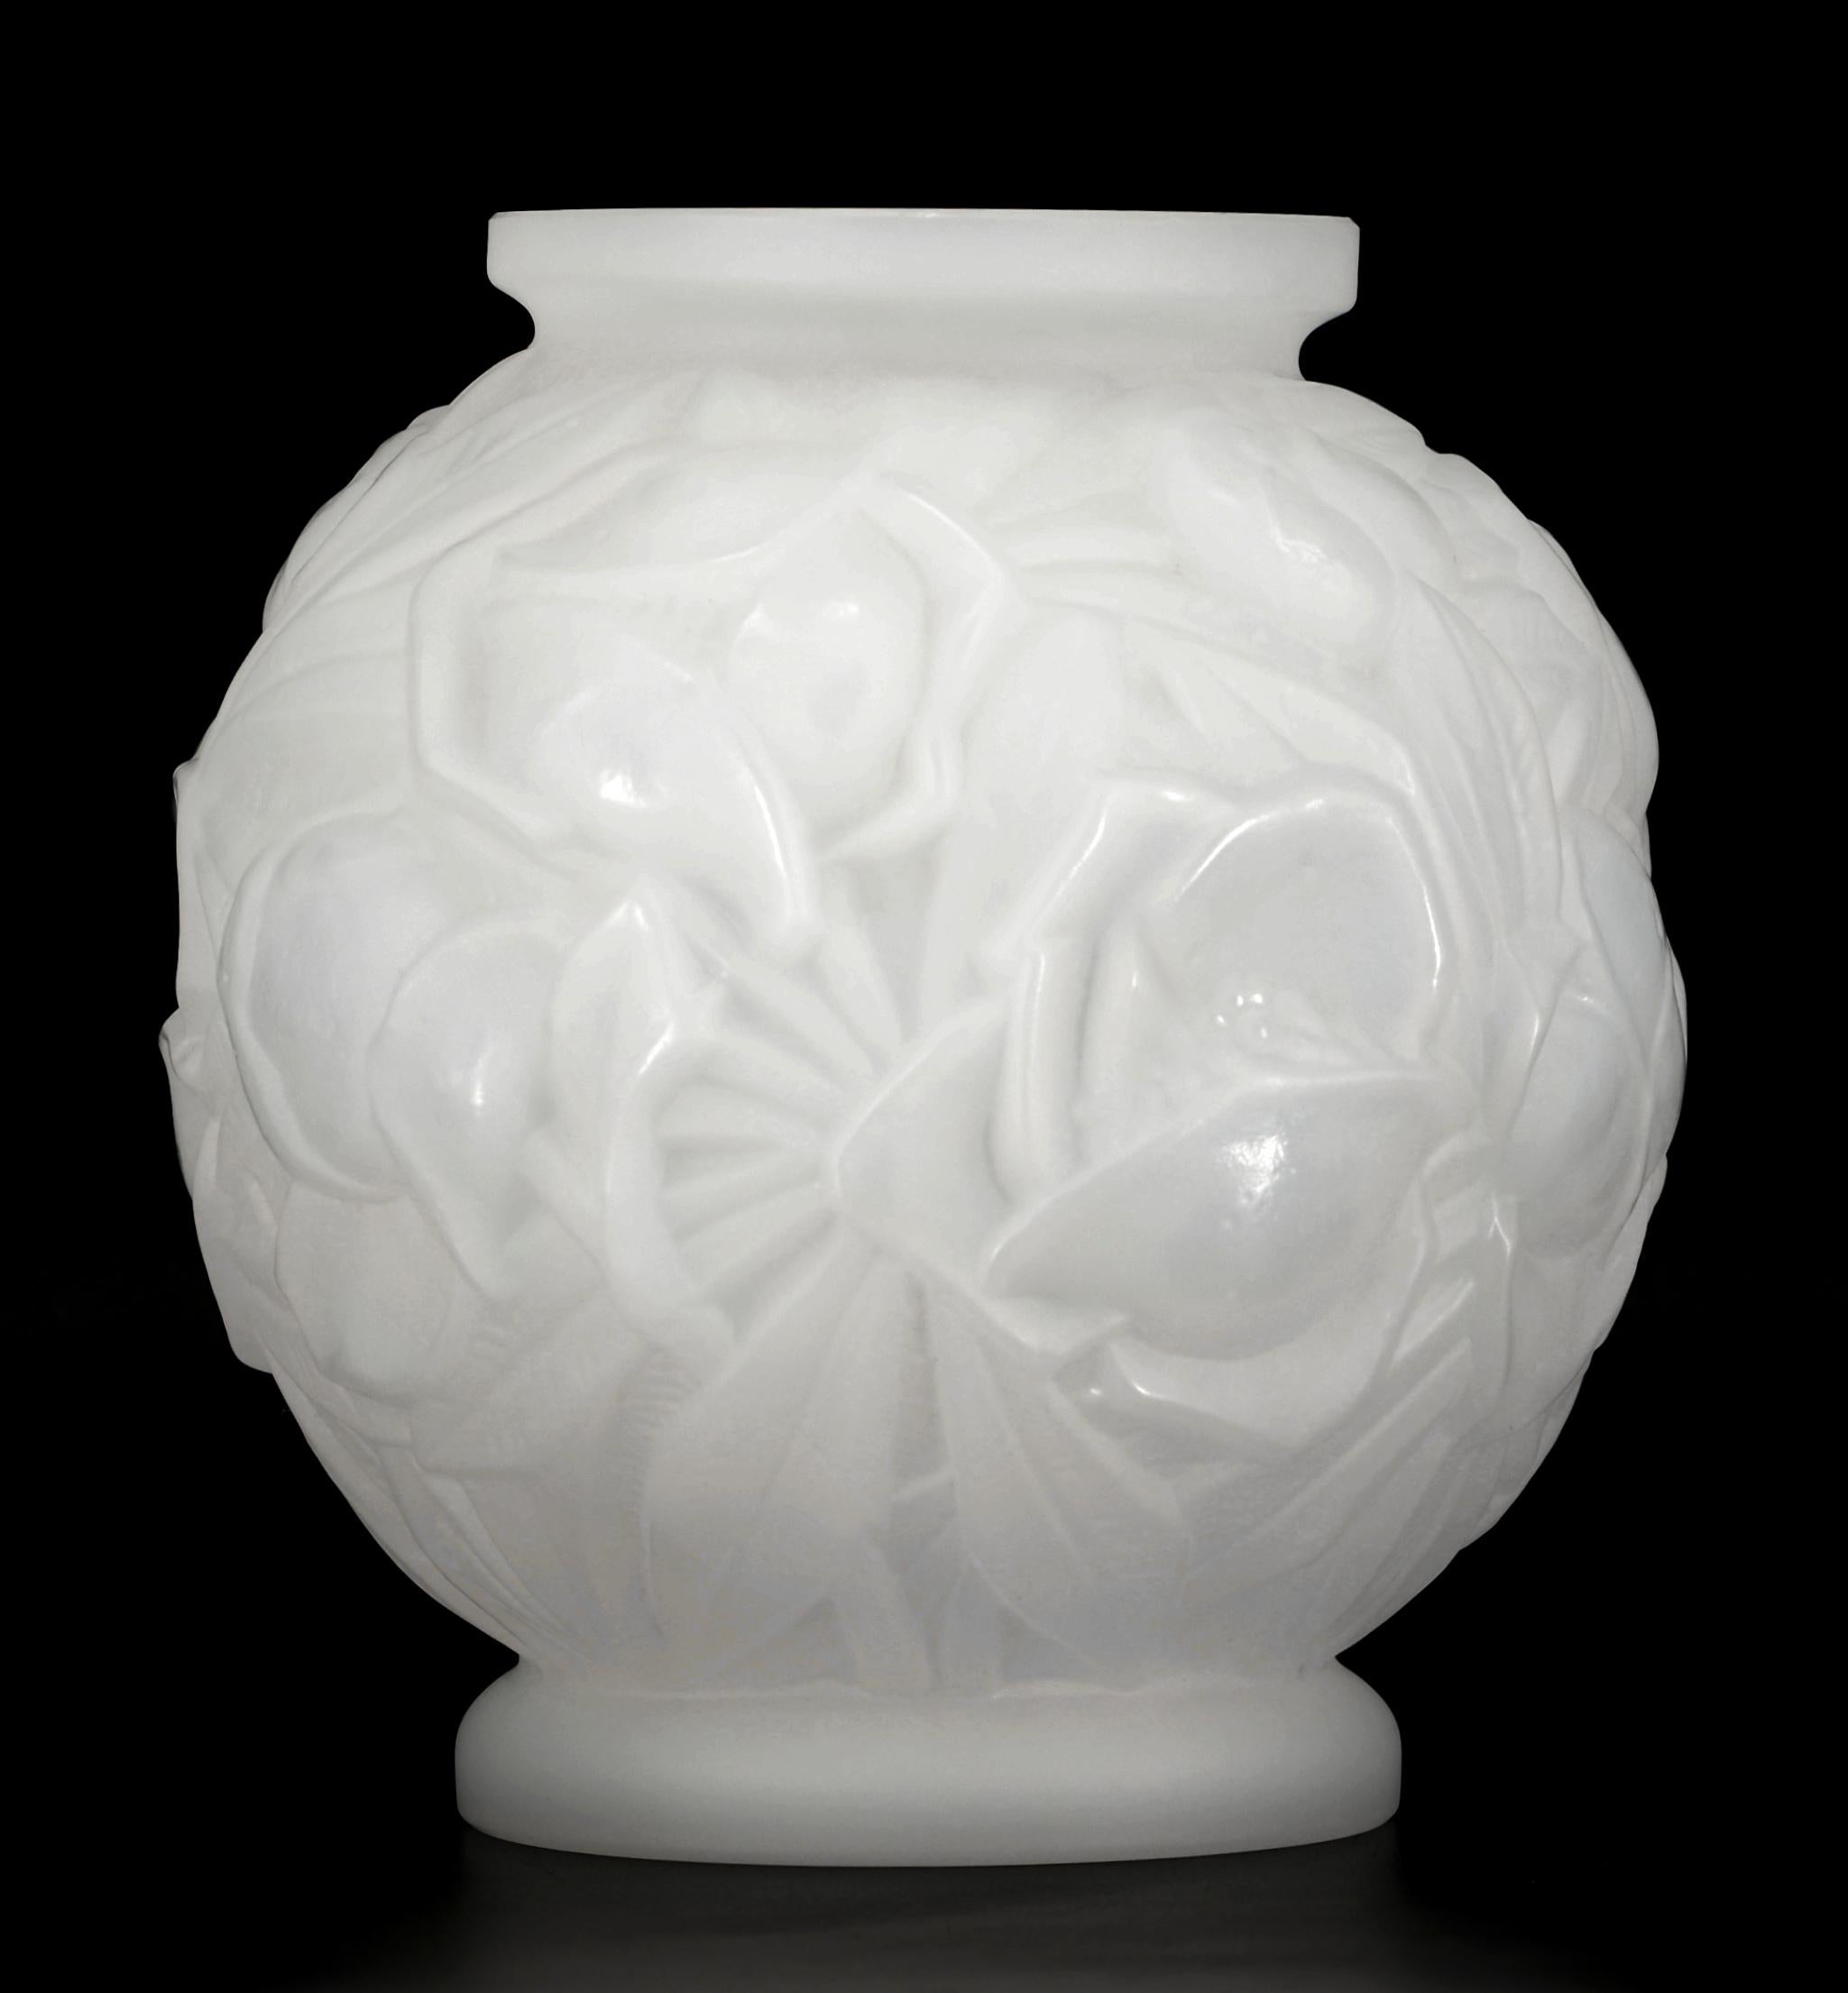 French Art Deco glass vase by STELLA, 42 rue des petites-écuries, Paris, France, ca.1930.. Rounded shaped vase. Thick frosted milky molded glass showing flowers. Height :7.5